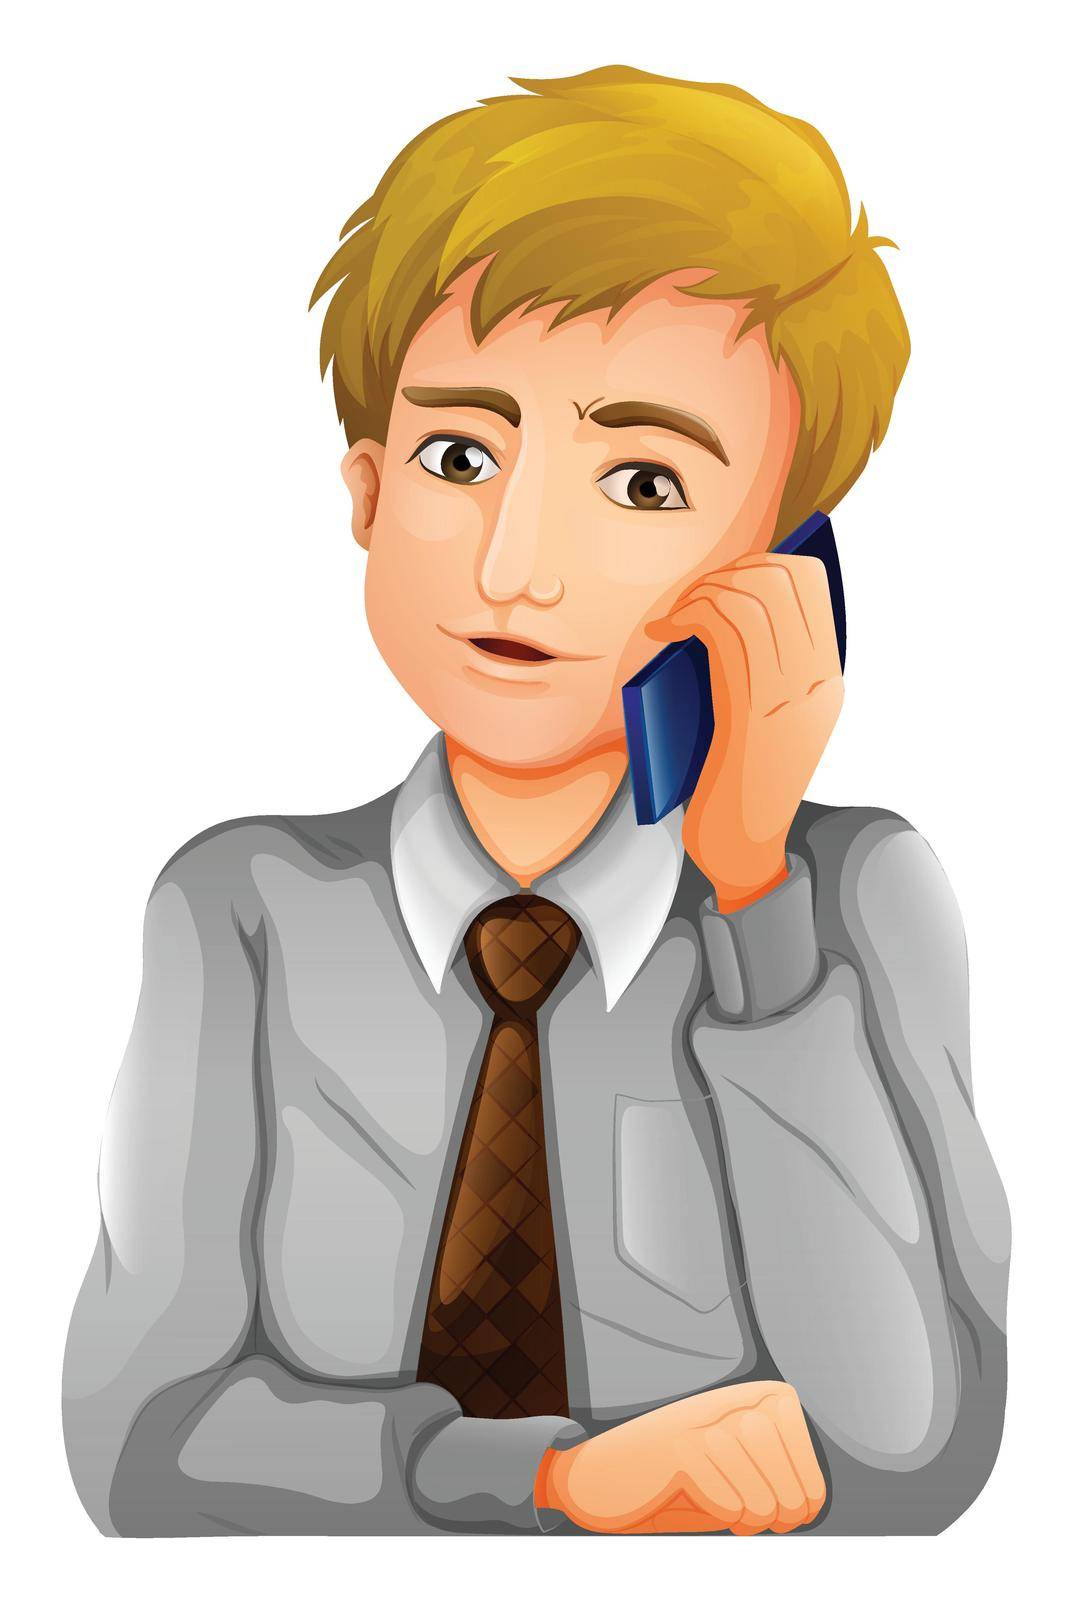 Illustration of a man using his cellphone on a white background